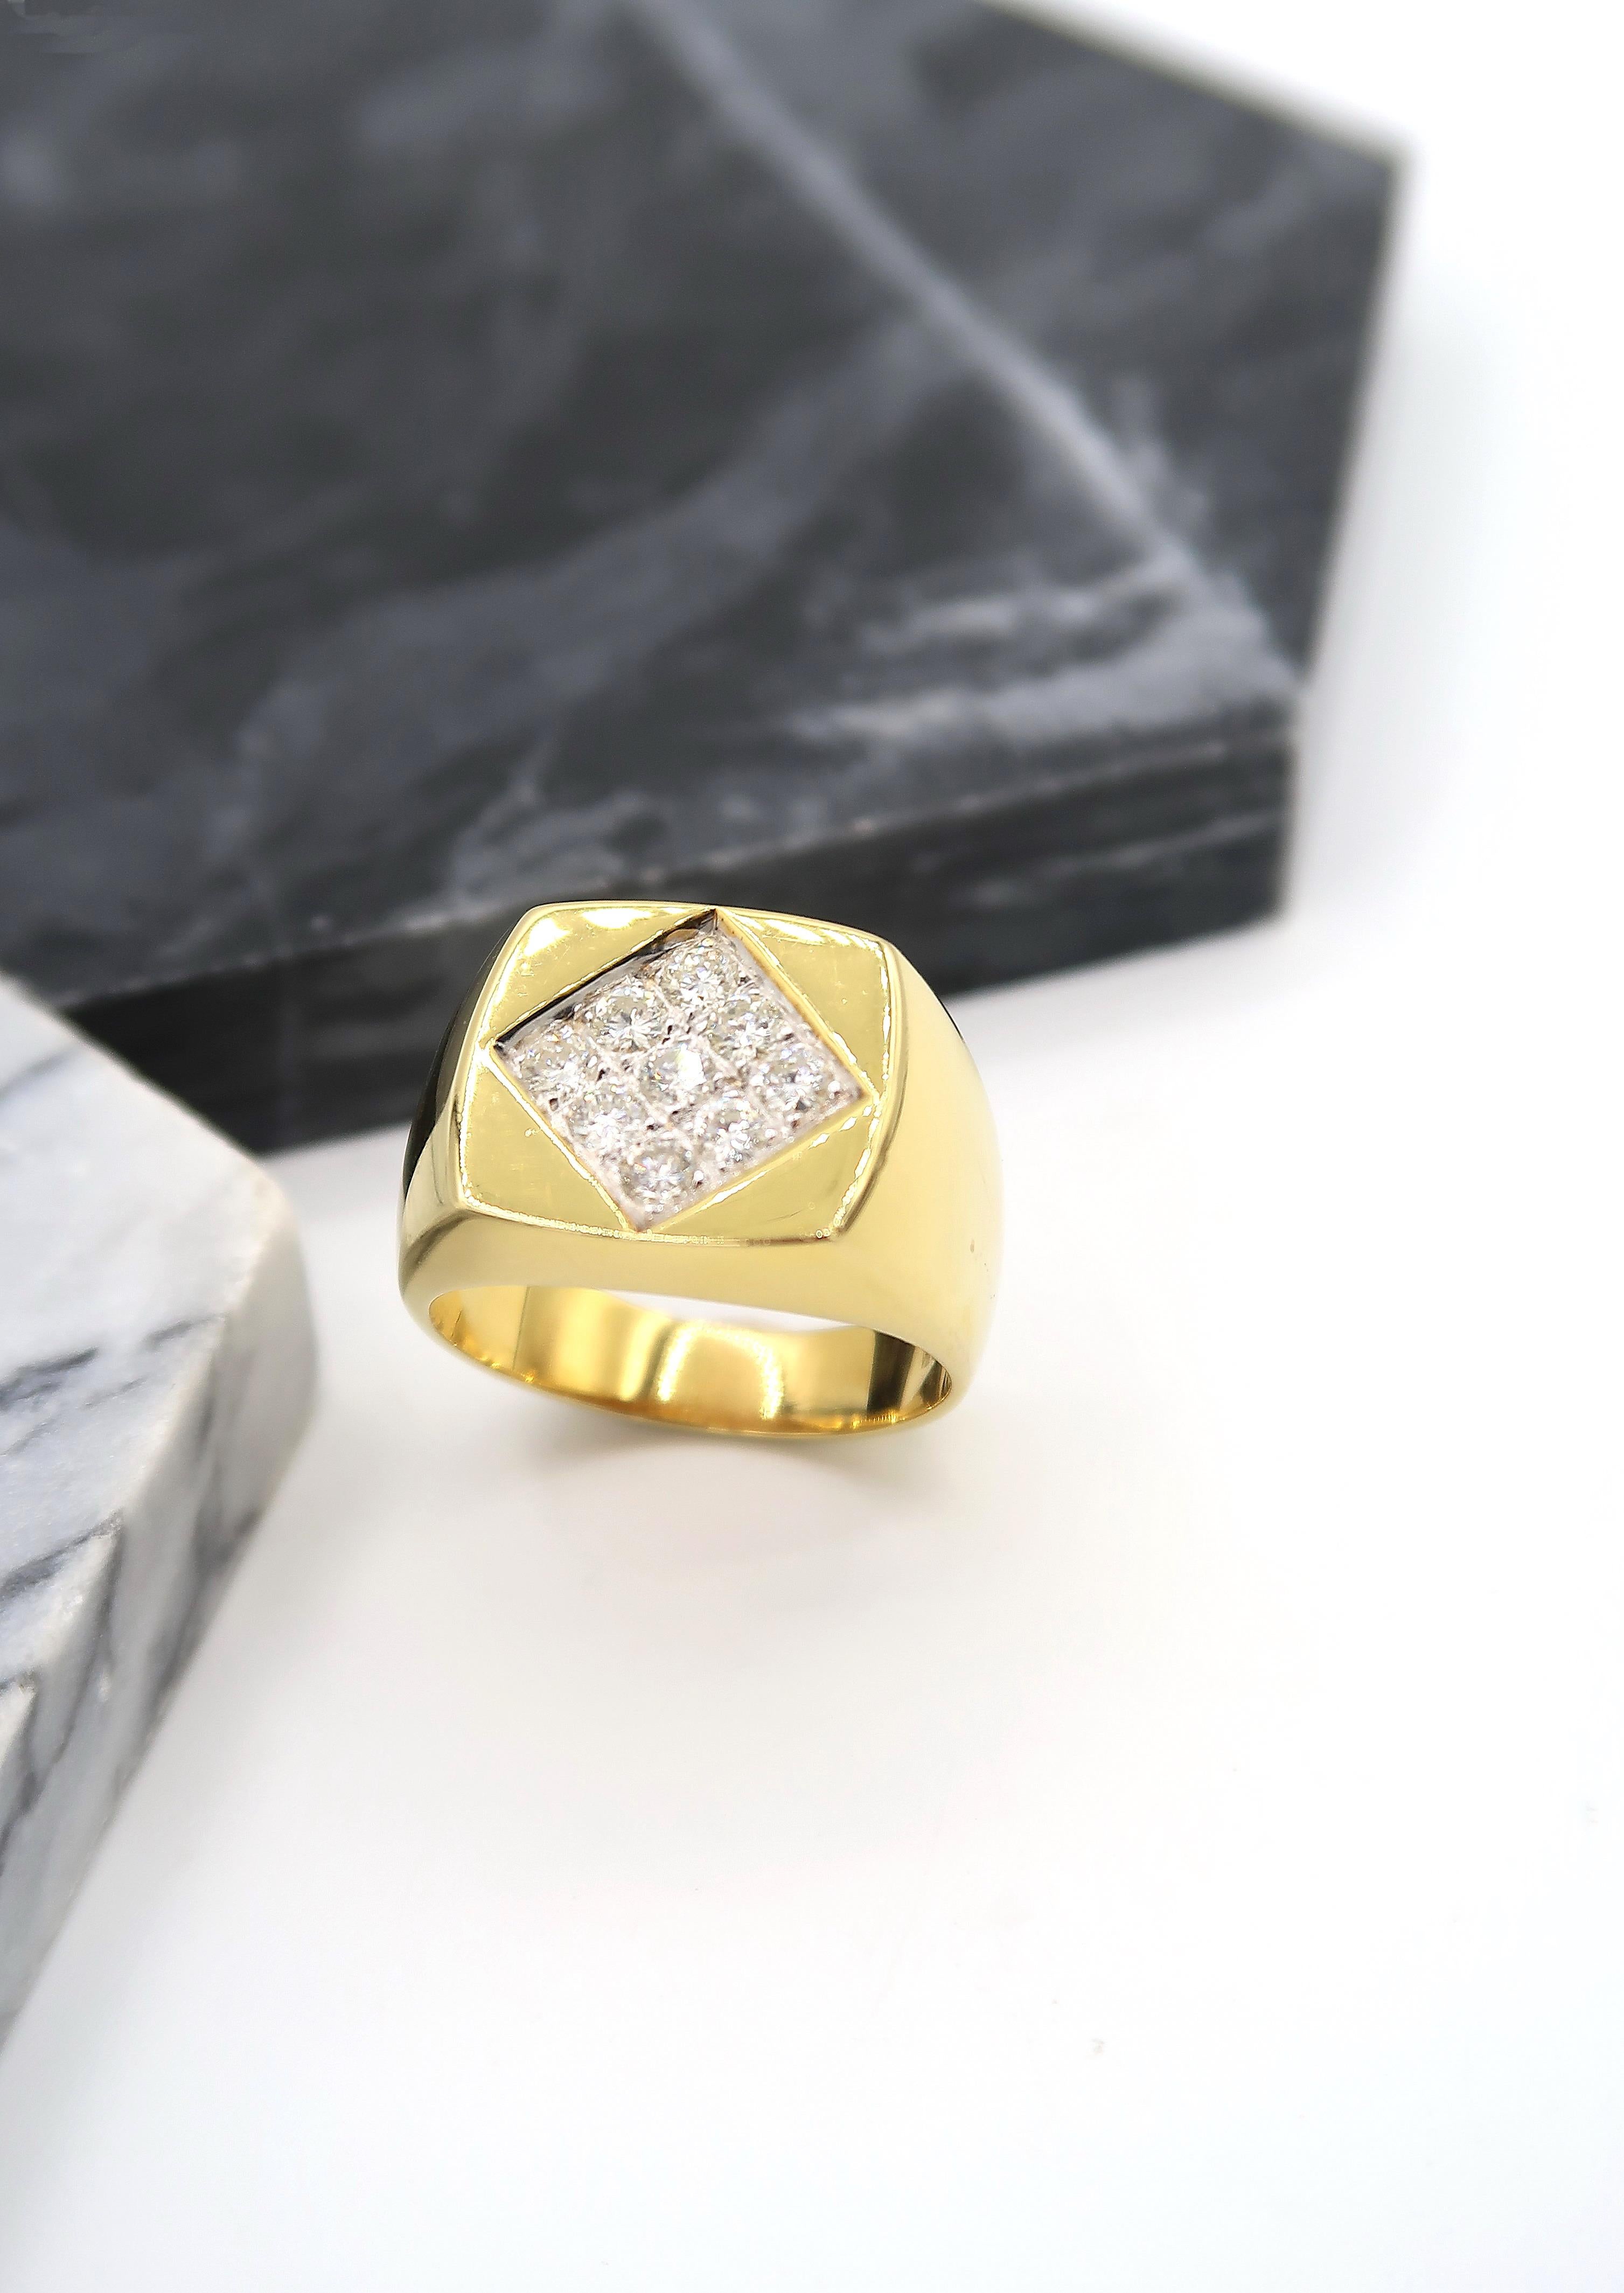 Diamond-set Square 18 Karat Yellow Gold Men's Signet Ring

Please let us know should you wish to have the ring resized or engraved. 
Ring size: US 8, UK P

Diamond: 0.76ct.
Gold: 18K 10.60g.